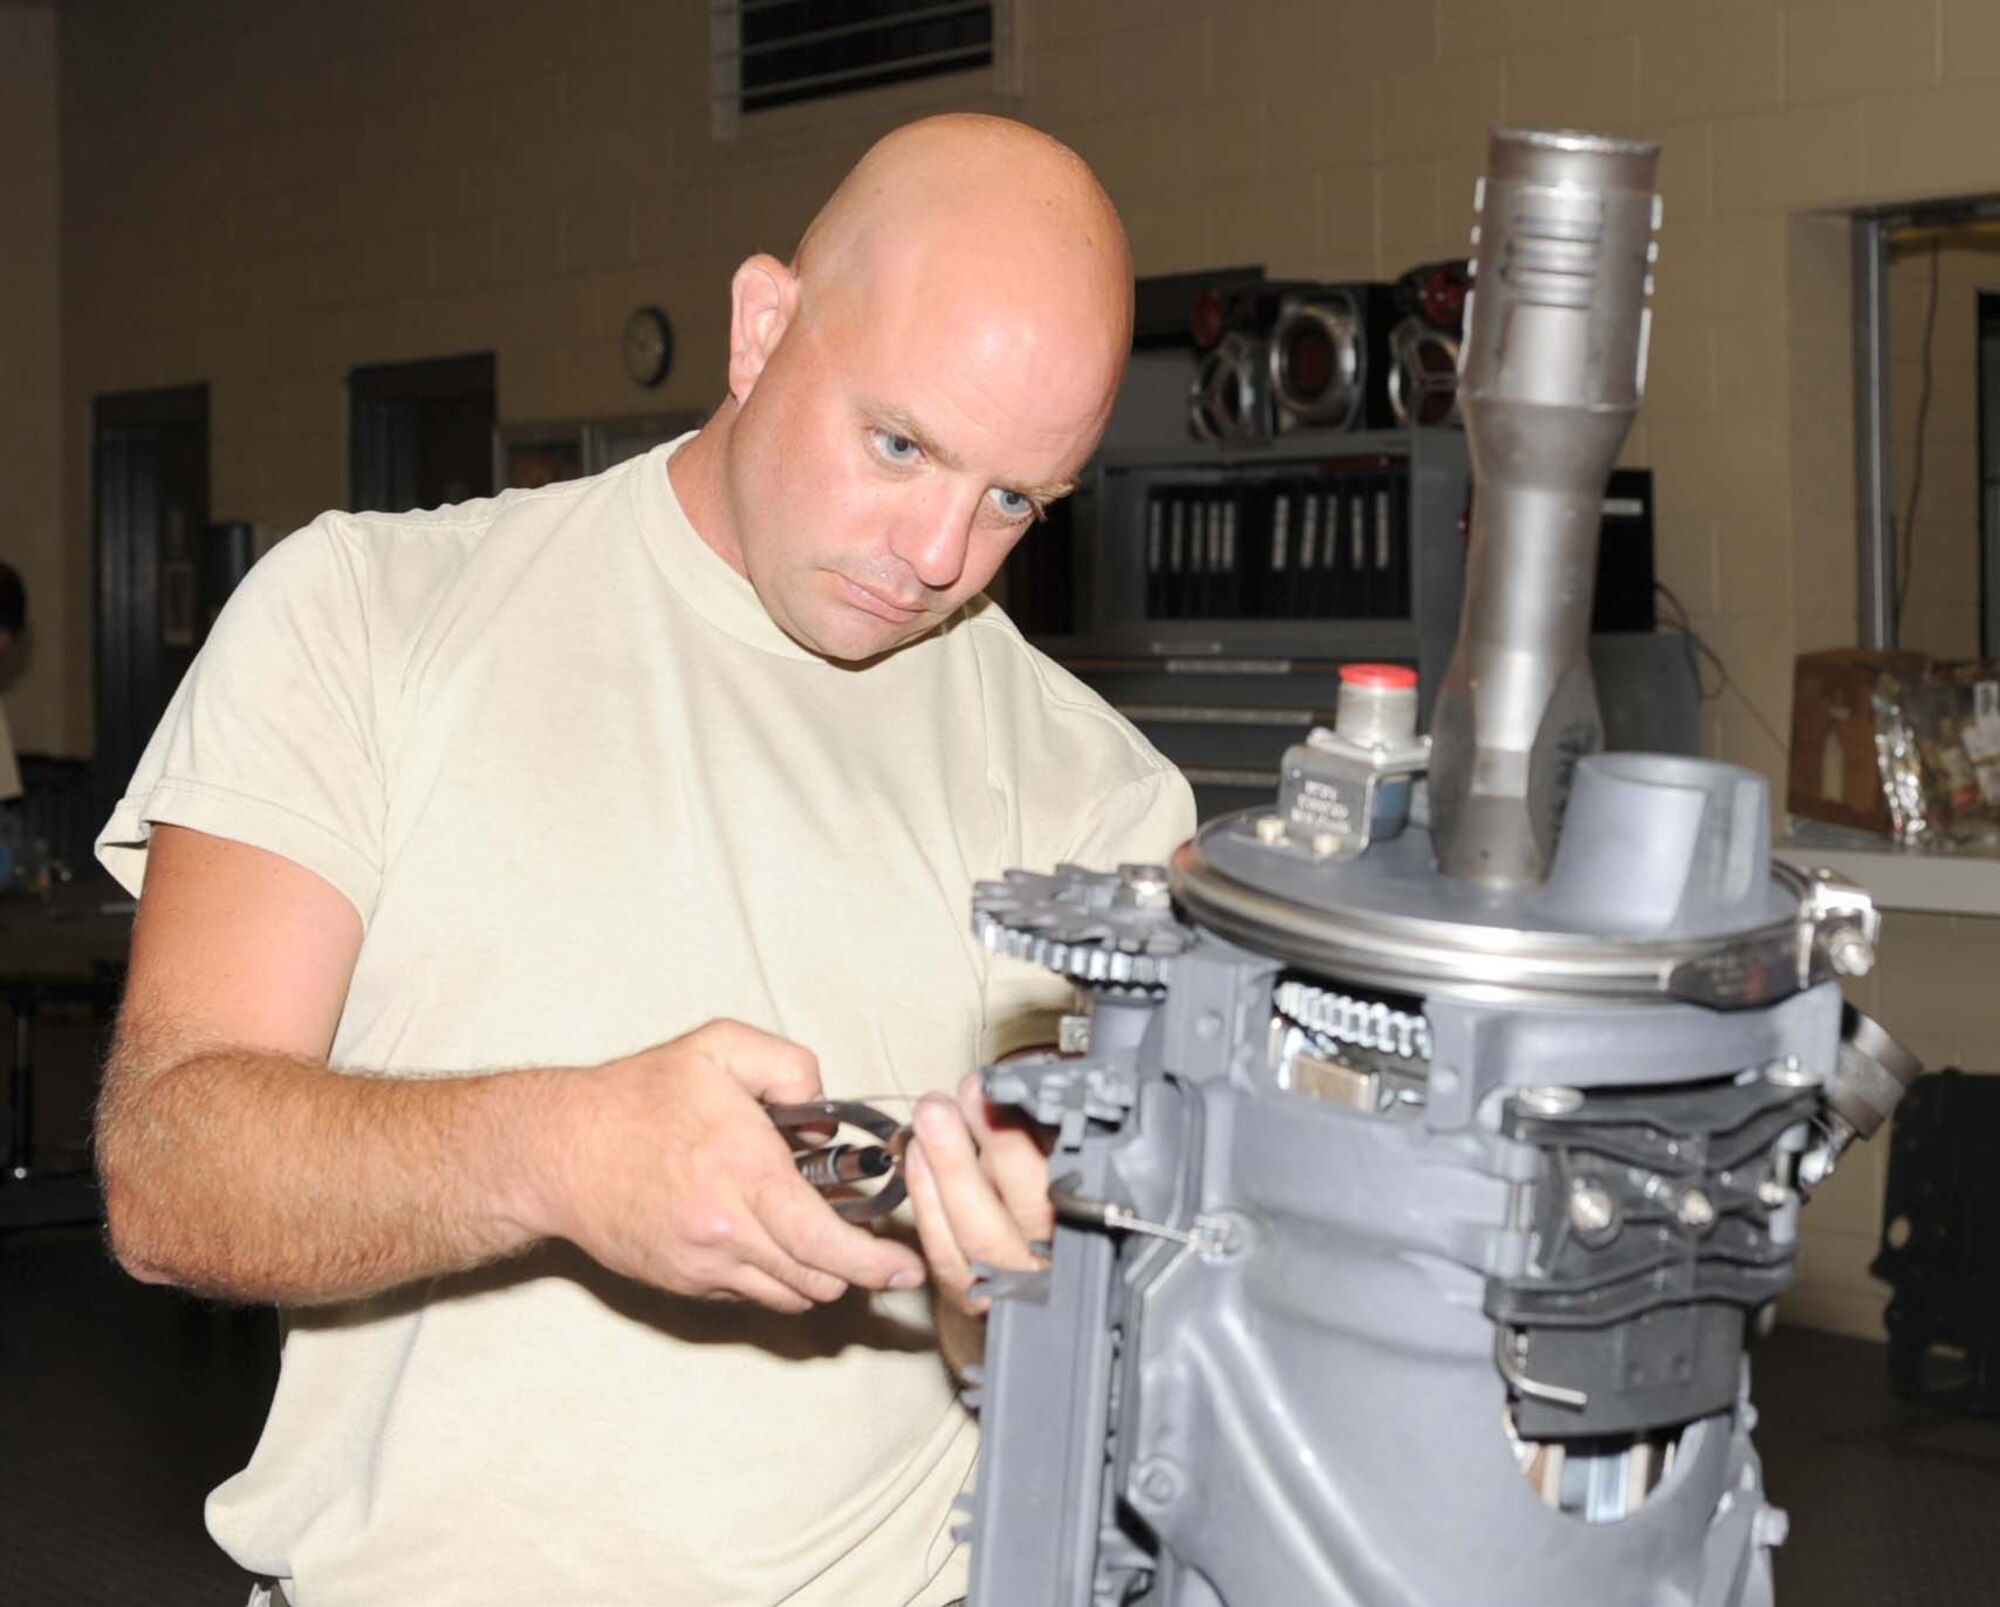 Tech. Sgt. Jason Althoff, 4th Equipment Maintenance Squadron armament shift superintendent, attaches safety wiring to an M61A1 20mm Gatling gun at Seymour Johnson Air Force Base, N.C., July 24, 2009. The safety wire is attached to the fire mechanism portion of the M61A1 allowing it to function properly. (U.S. Air Force photo by Airman 1st Class Gino Reyes)